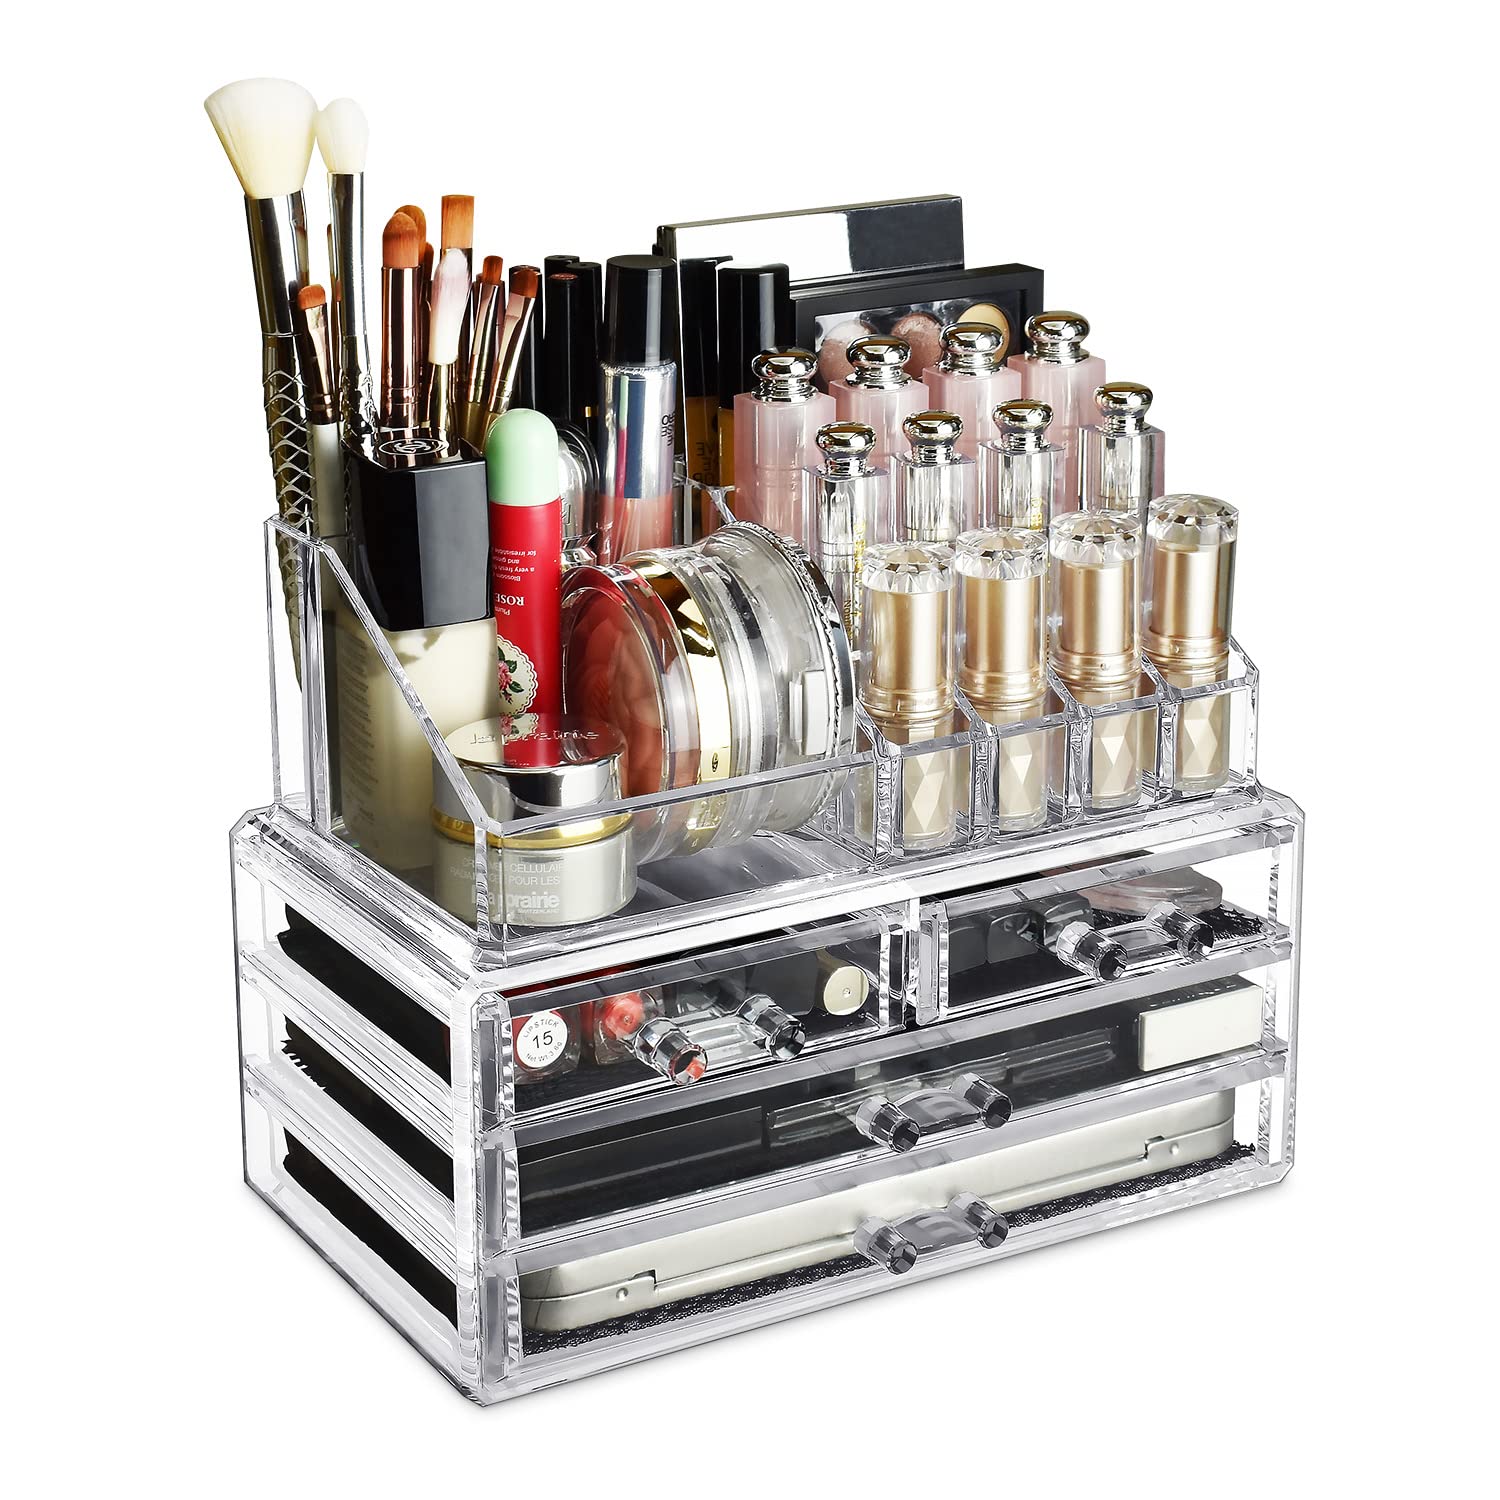 Ikee Design Clear Cosmetic Storage Organizer, Clear Makeup Organizer Cosmetic Display Case for Vanity, Bathroom Counter or 1) 1 Top 4 Drawers